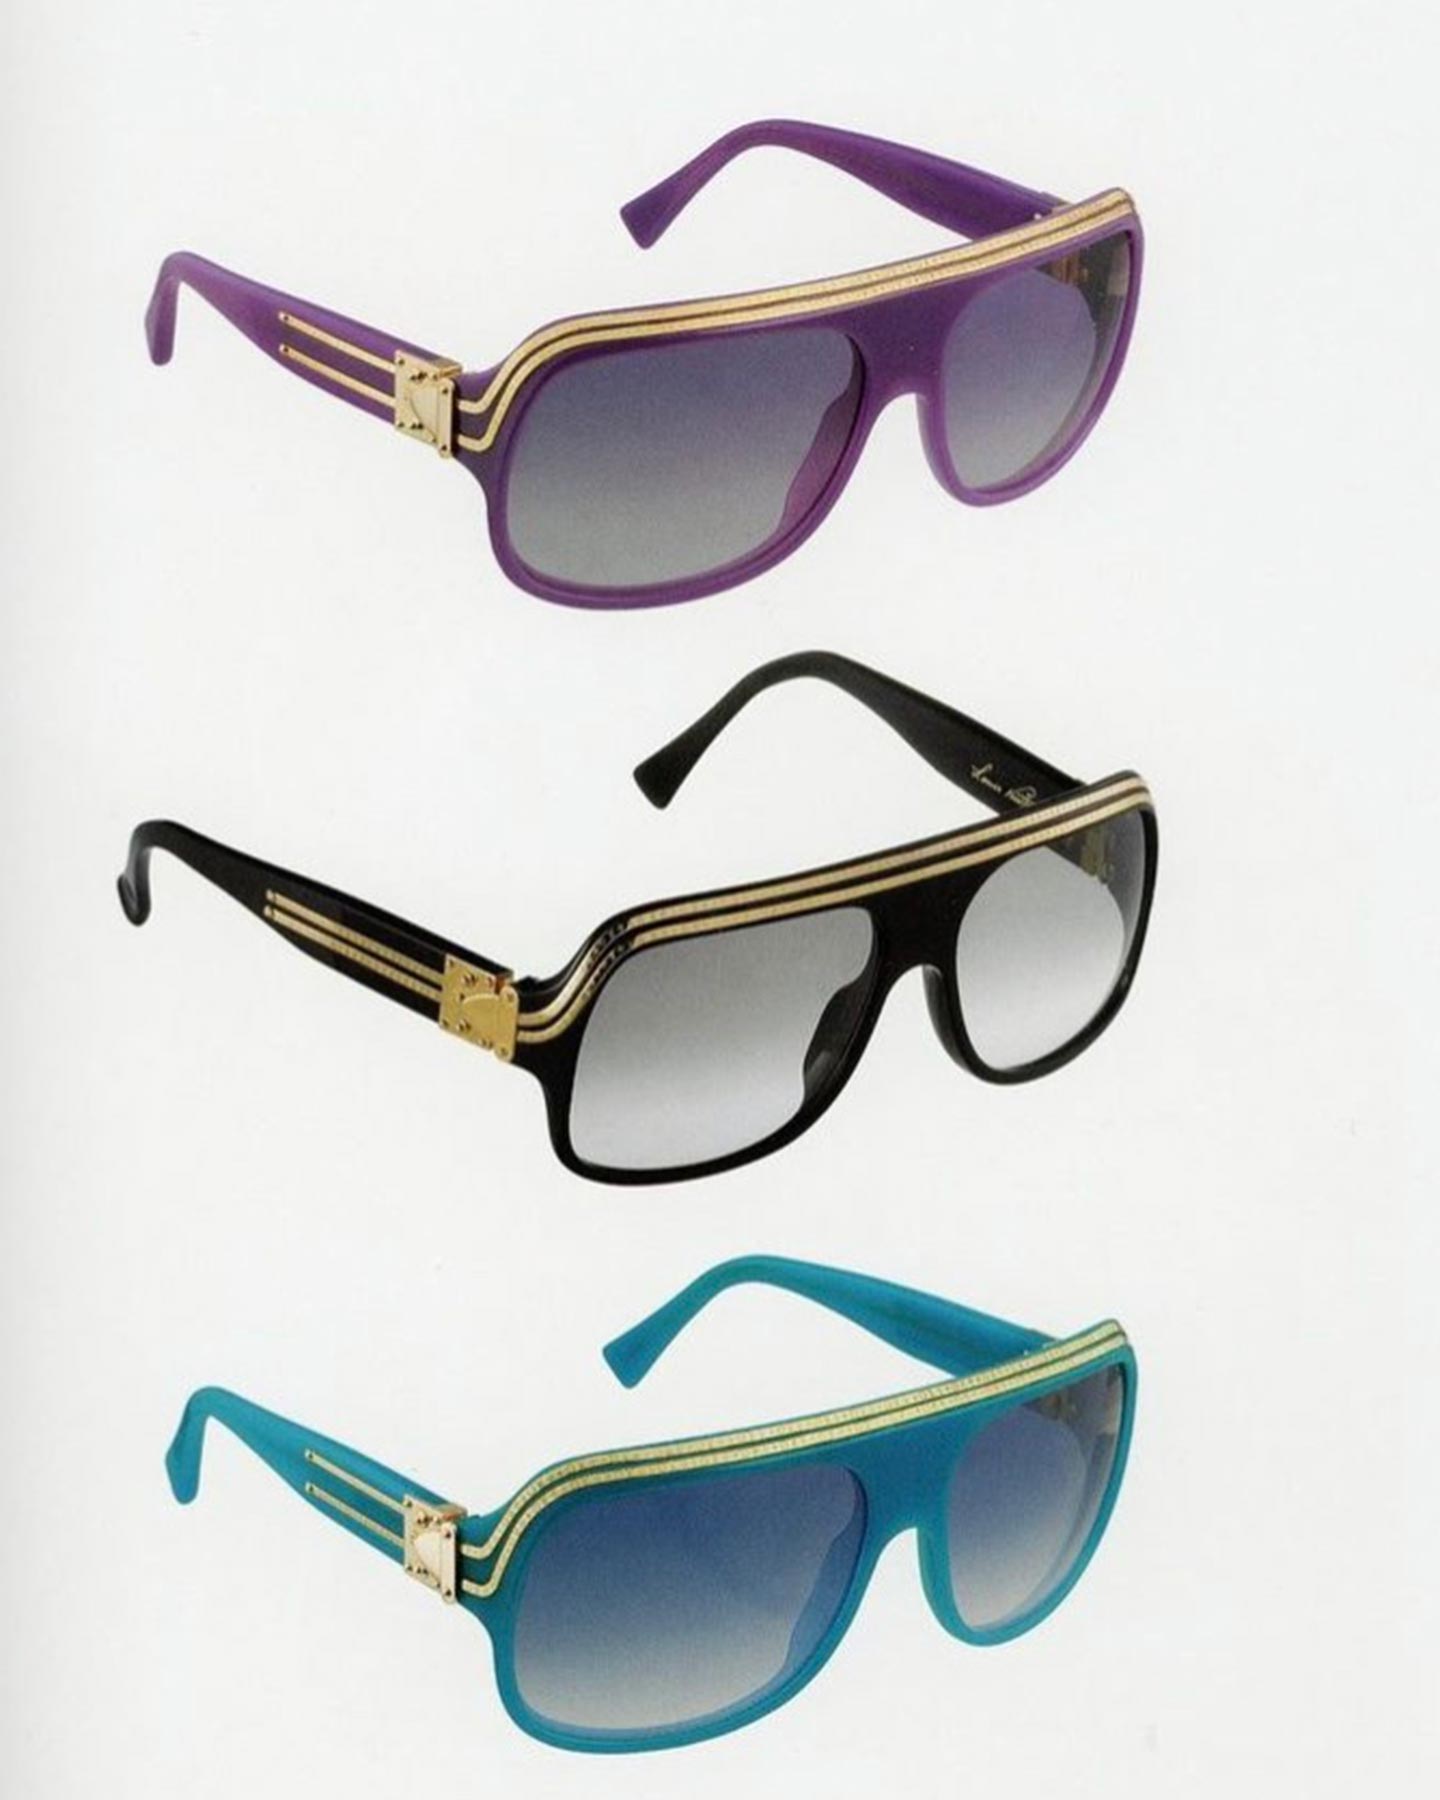 Pharrell and Nigo designed the Millionaire sunglasses for Marc Jacobs' Louis Vuitton spring-summer 2005 collection. The red, black and white frames were released in 2005. The purple and turquoise were reissued in 2007